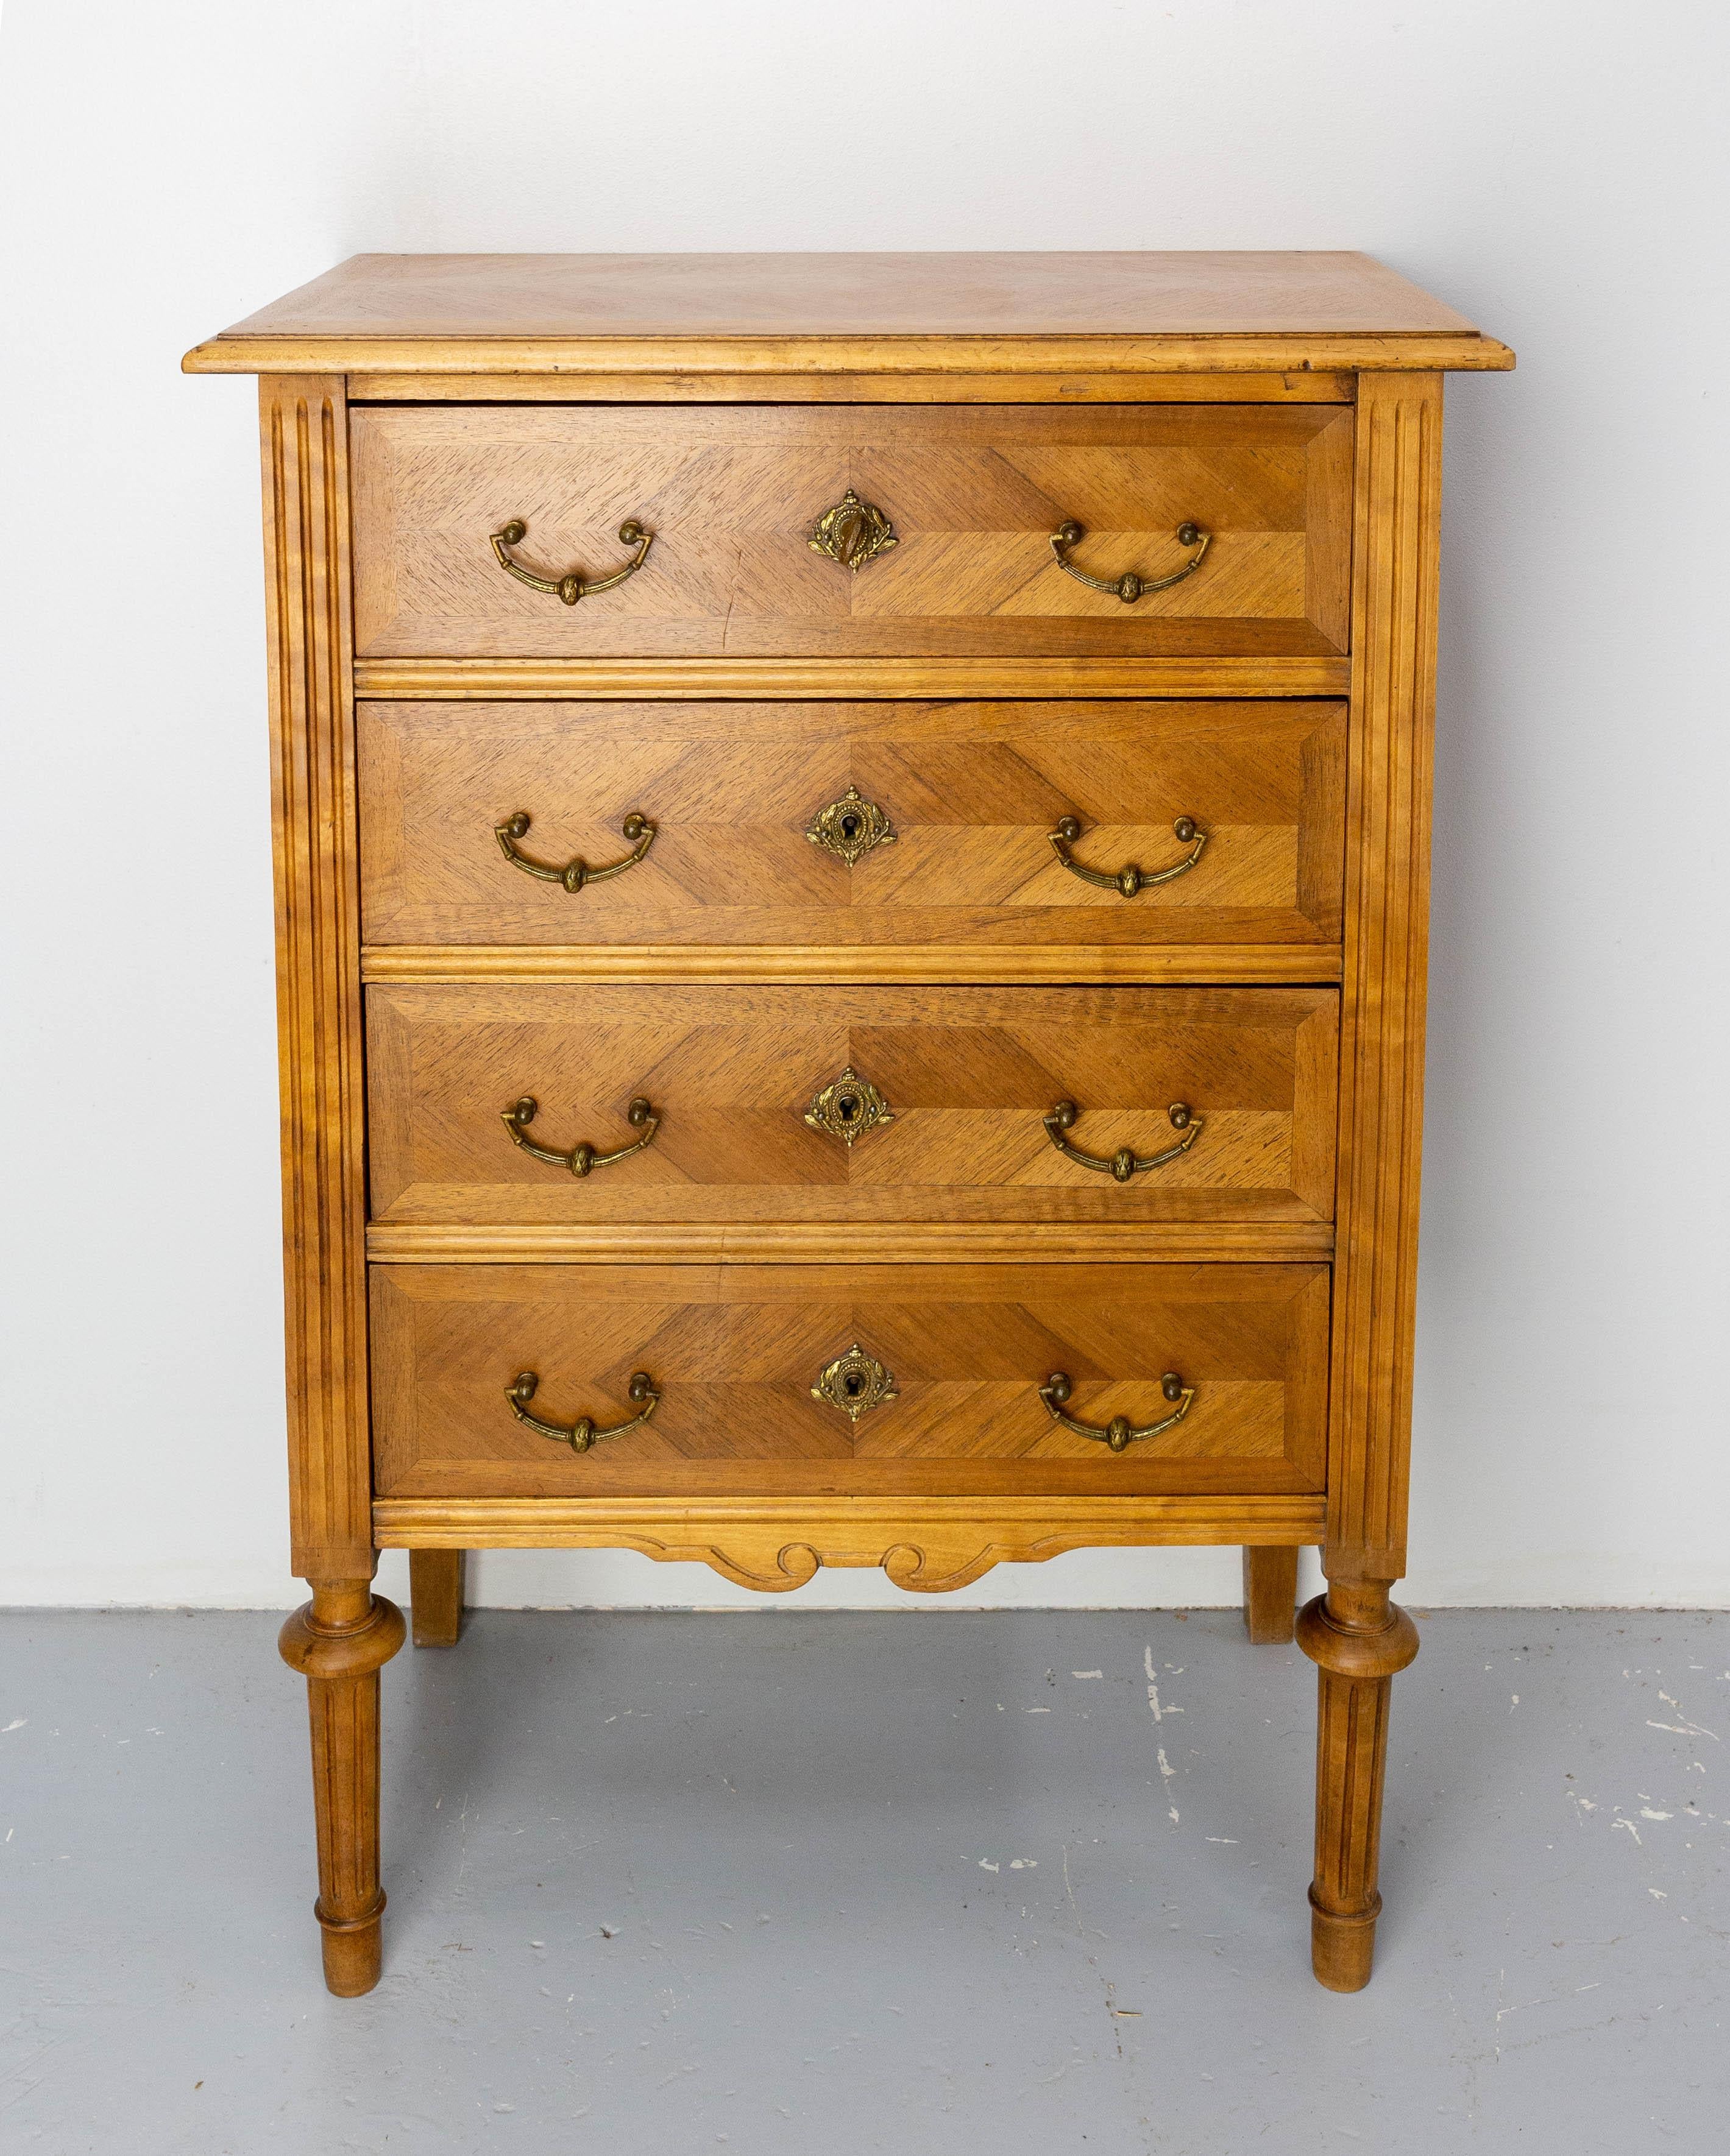 French commode chest of drawers little chiffonnier early 10th century Louis XVI style.
Four drawers, with elegant brass handles.

Good antique condition, with minor signs of age and wear.

Shipping:
Measures: P 34 / 59 H 82.5 cm, 18 kg.